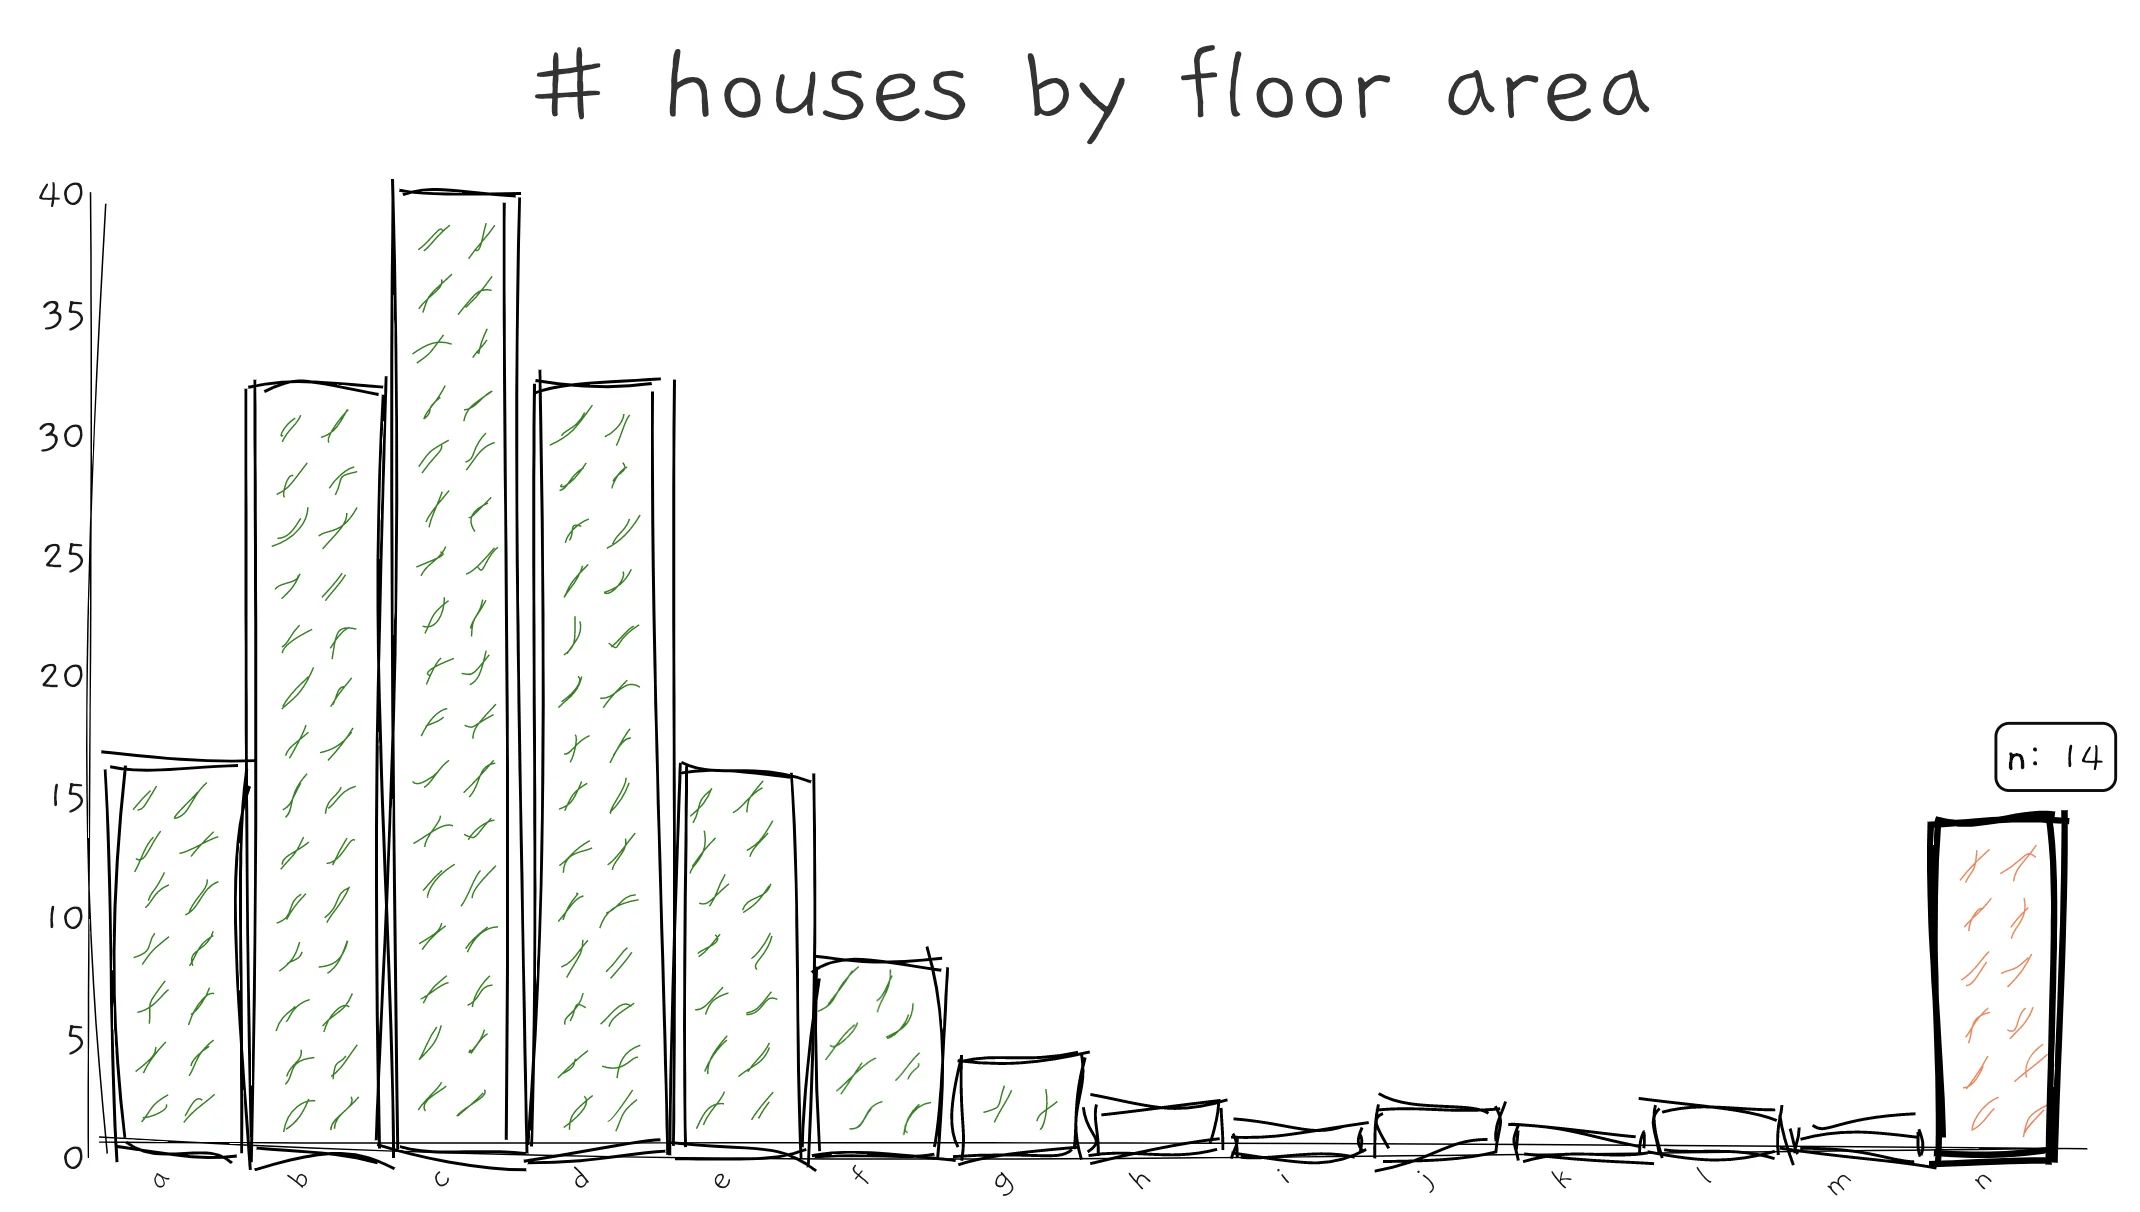 Left: a number of houses with humongous floor area at the right-most bar. Right: a number of people with -1 age.